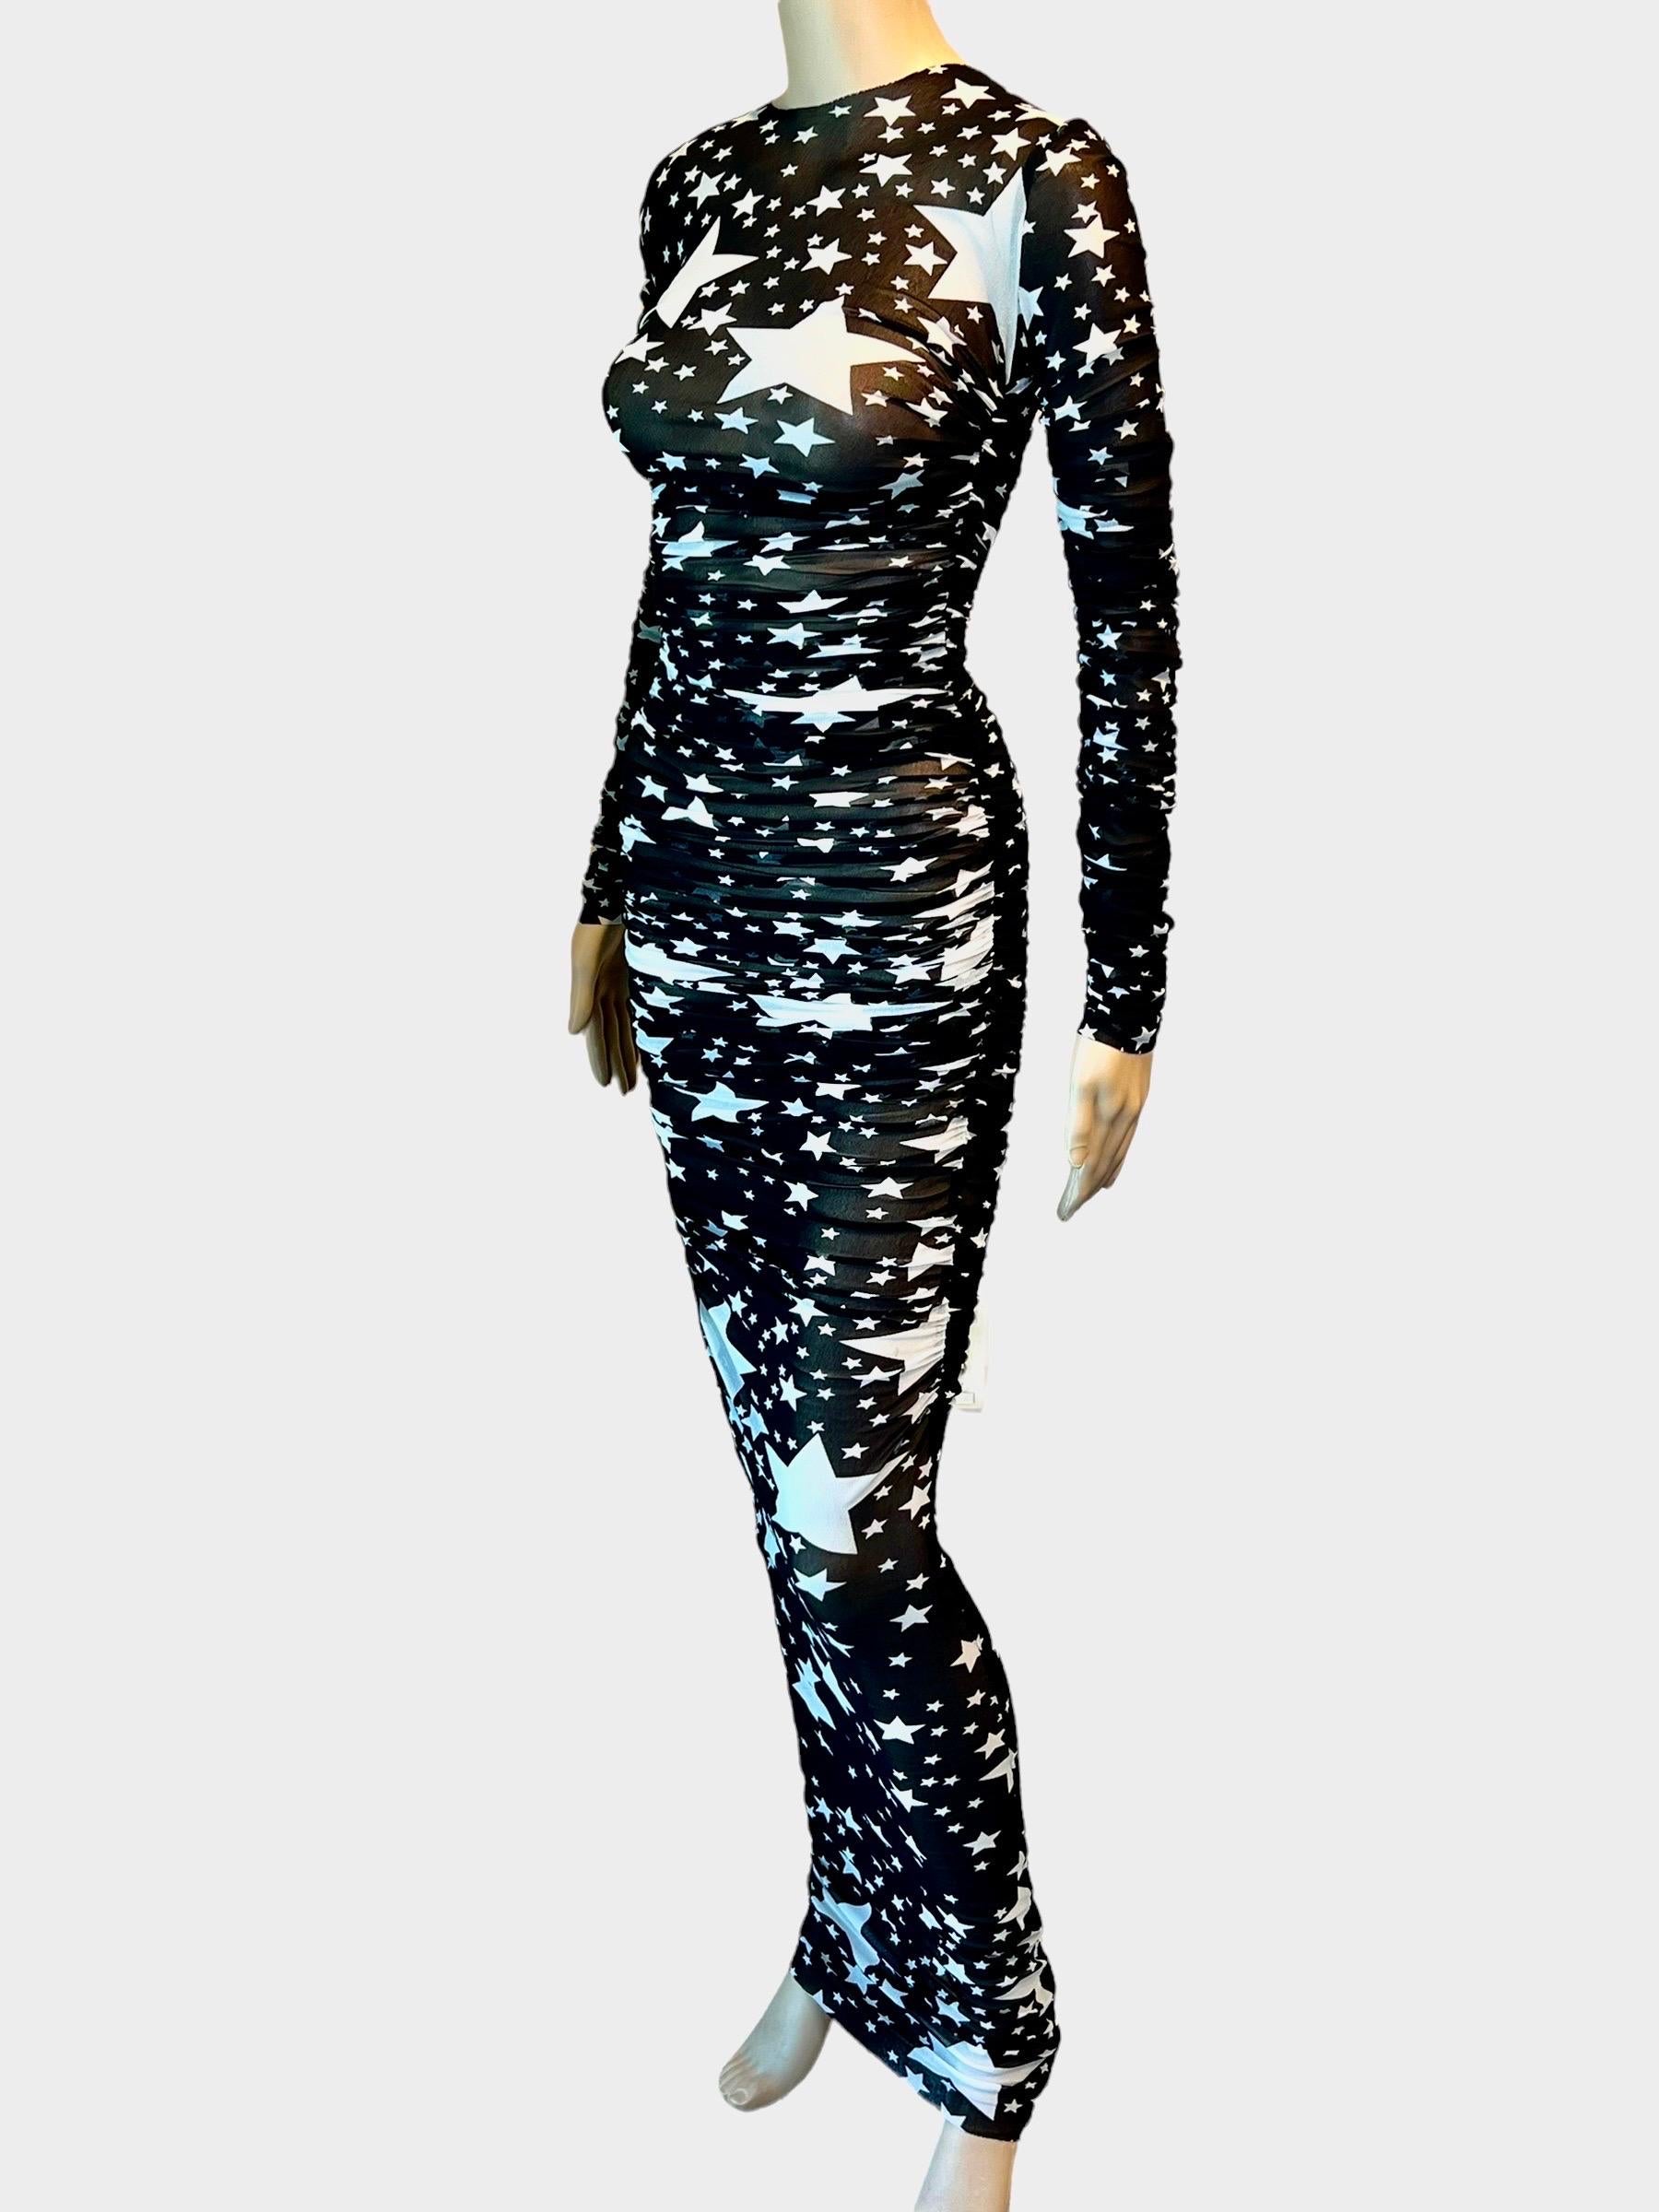 Dolce & Gabbana F/W 2011 Runway Star Print Sheer Mesh Ruched Maxi Evening Dress IT 36

Look 71 from the Fall 2011 Collection.

Excellent Condition.
